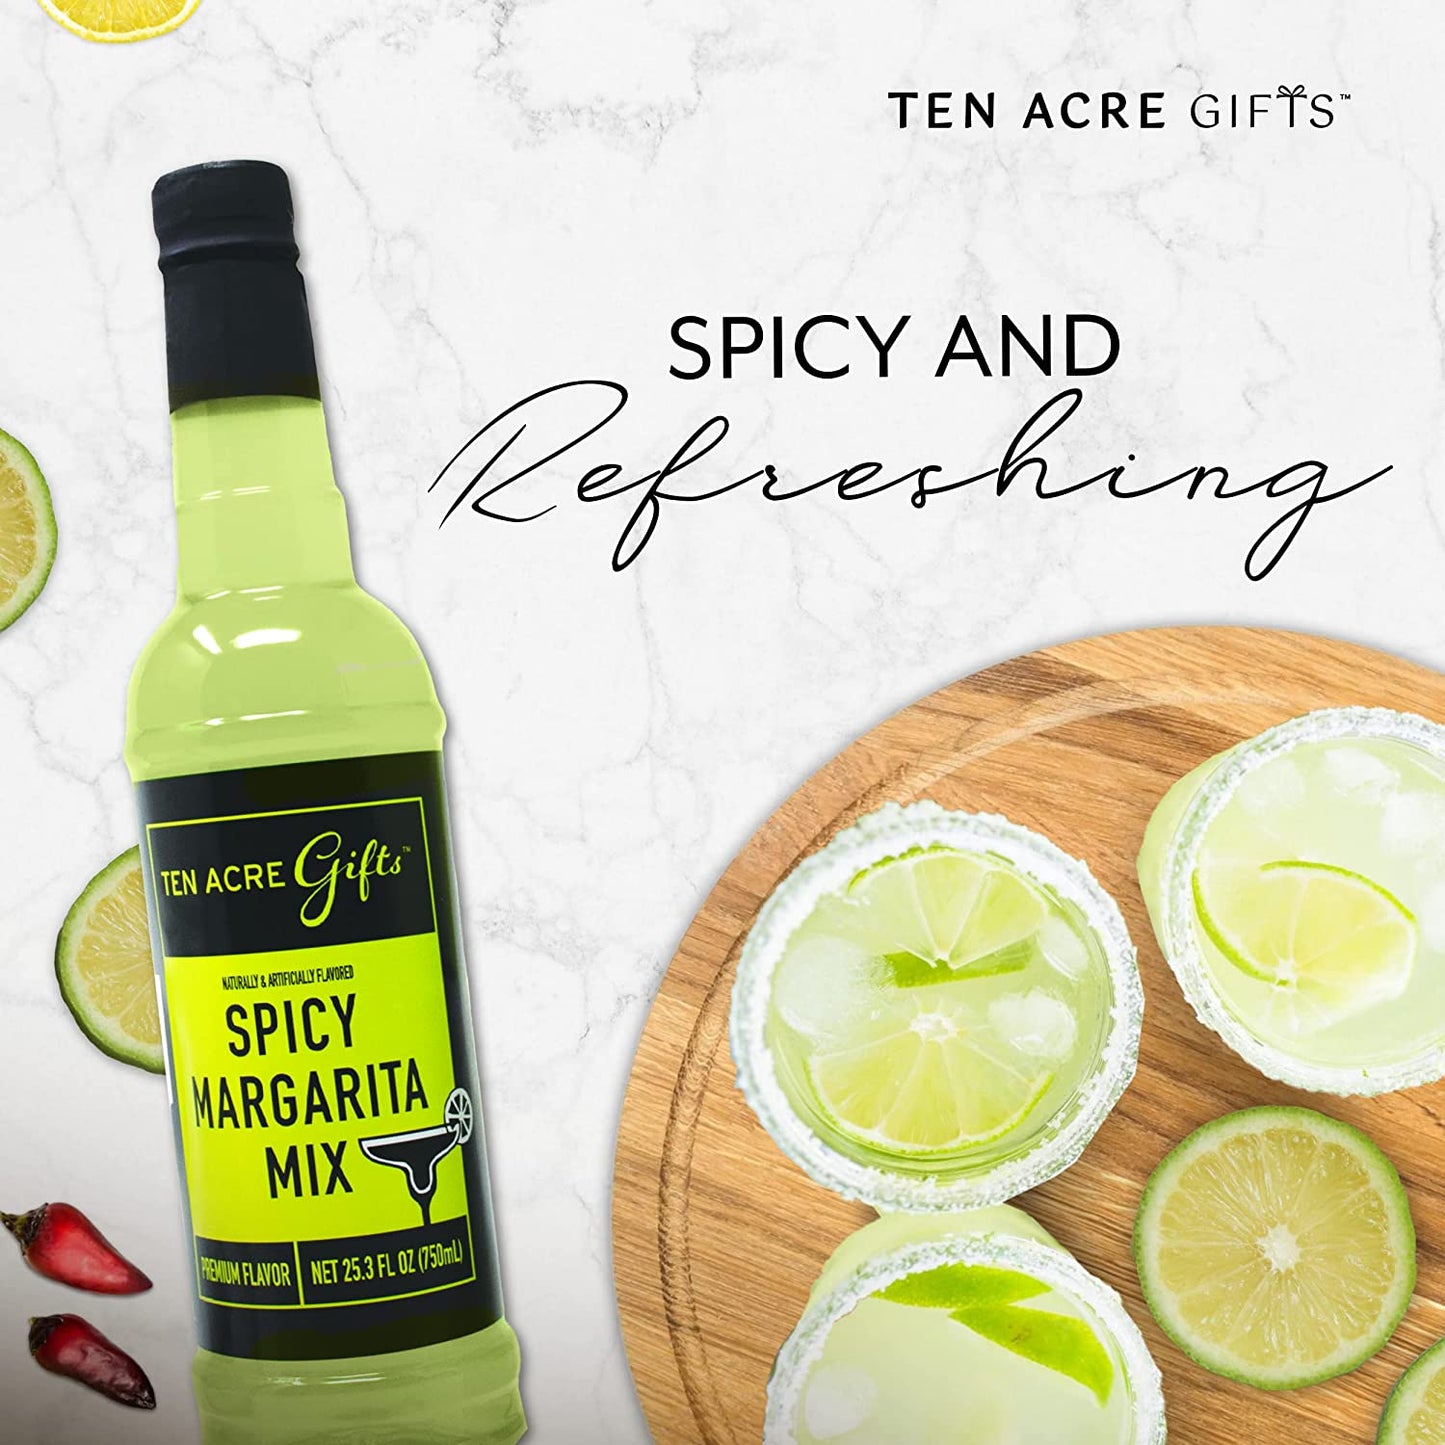 Natural Lime Margarita Mix – TC CRAFT Tequila